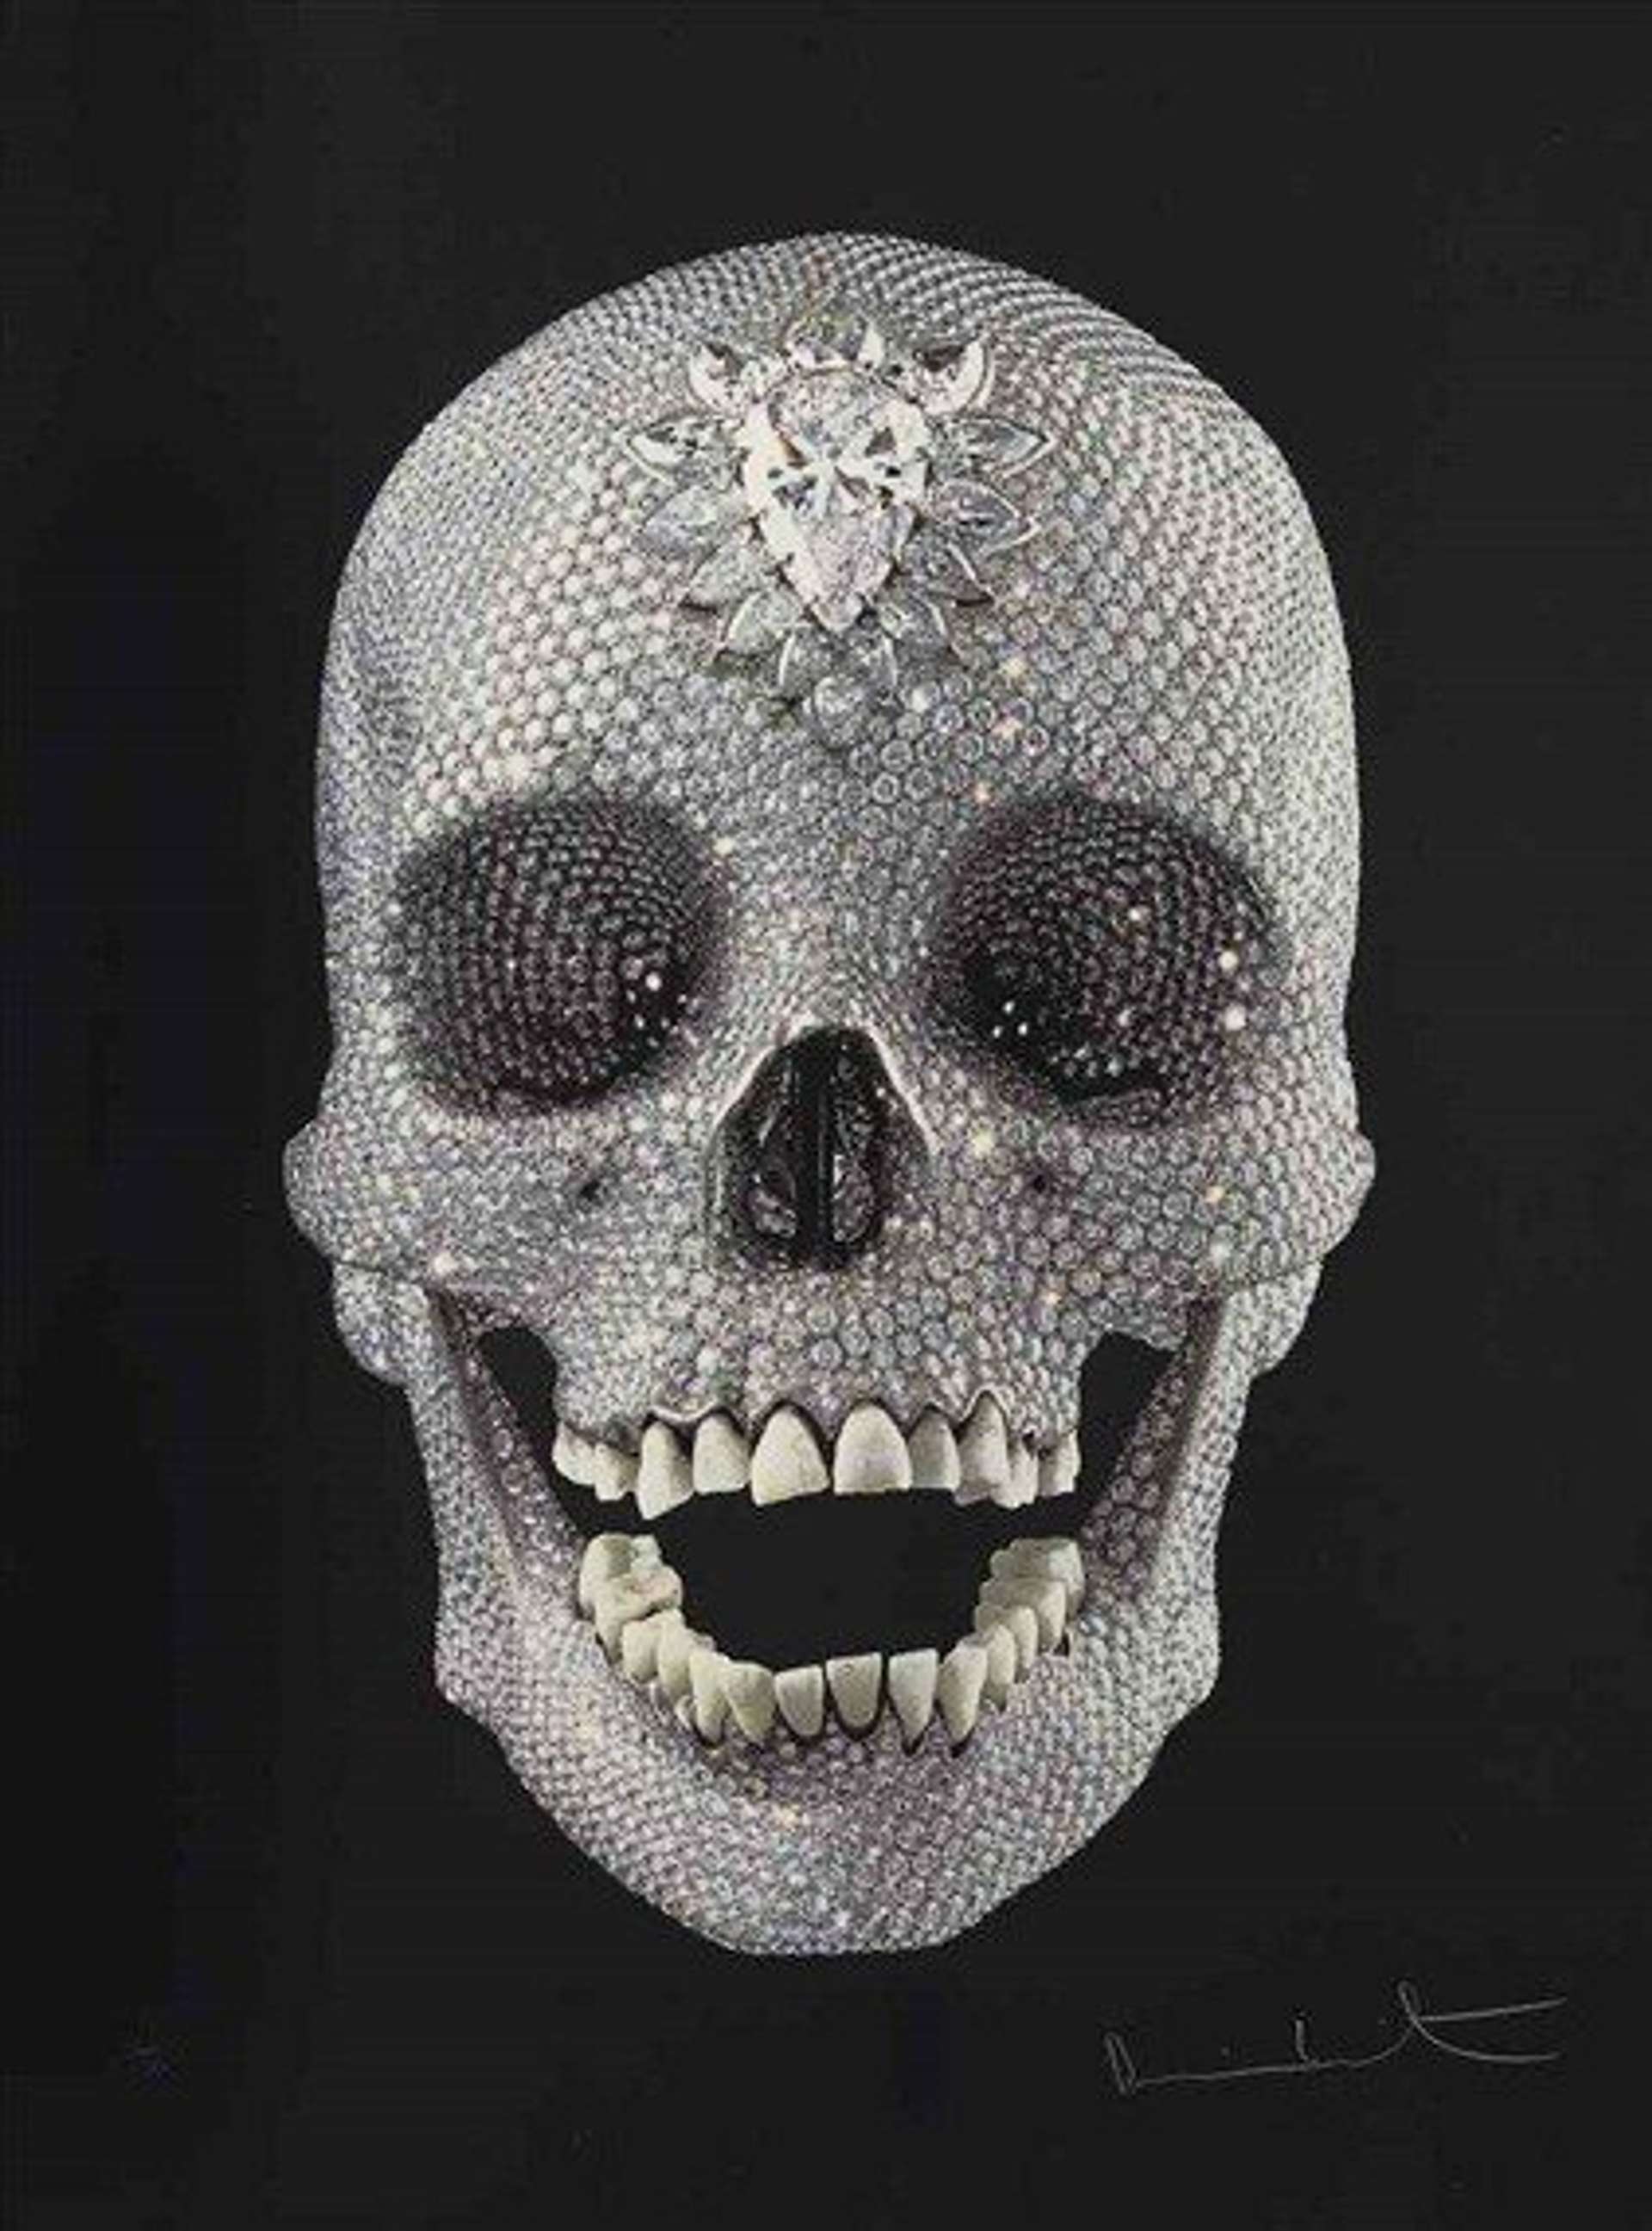 For The Love Of God, Wonder by Damien Hirst